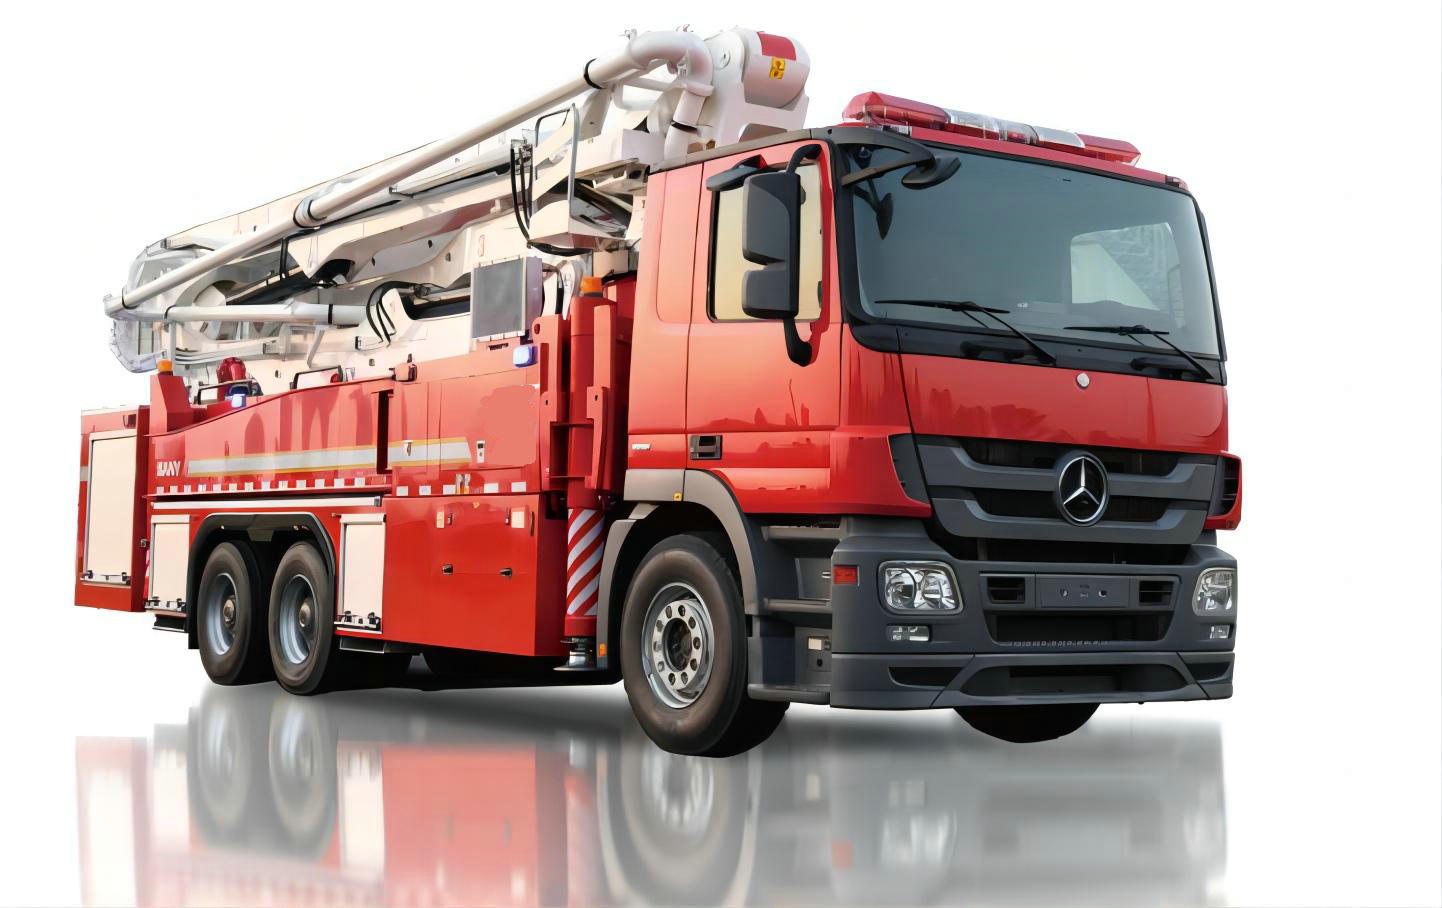 Actros 48m Long Span Water Tower Lifter Fire Truck JP48